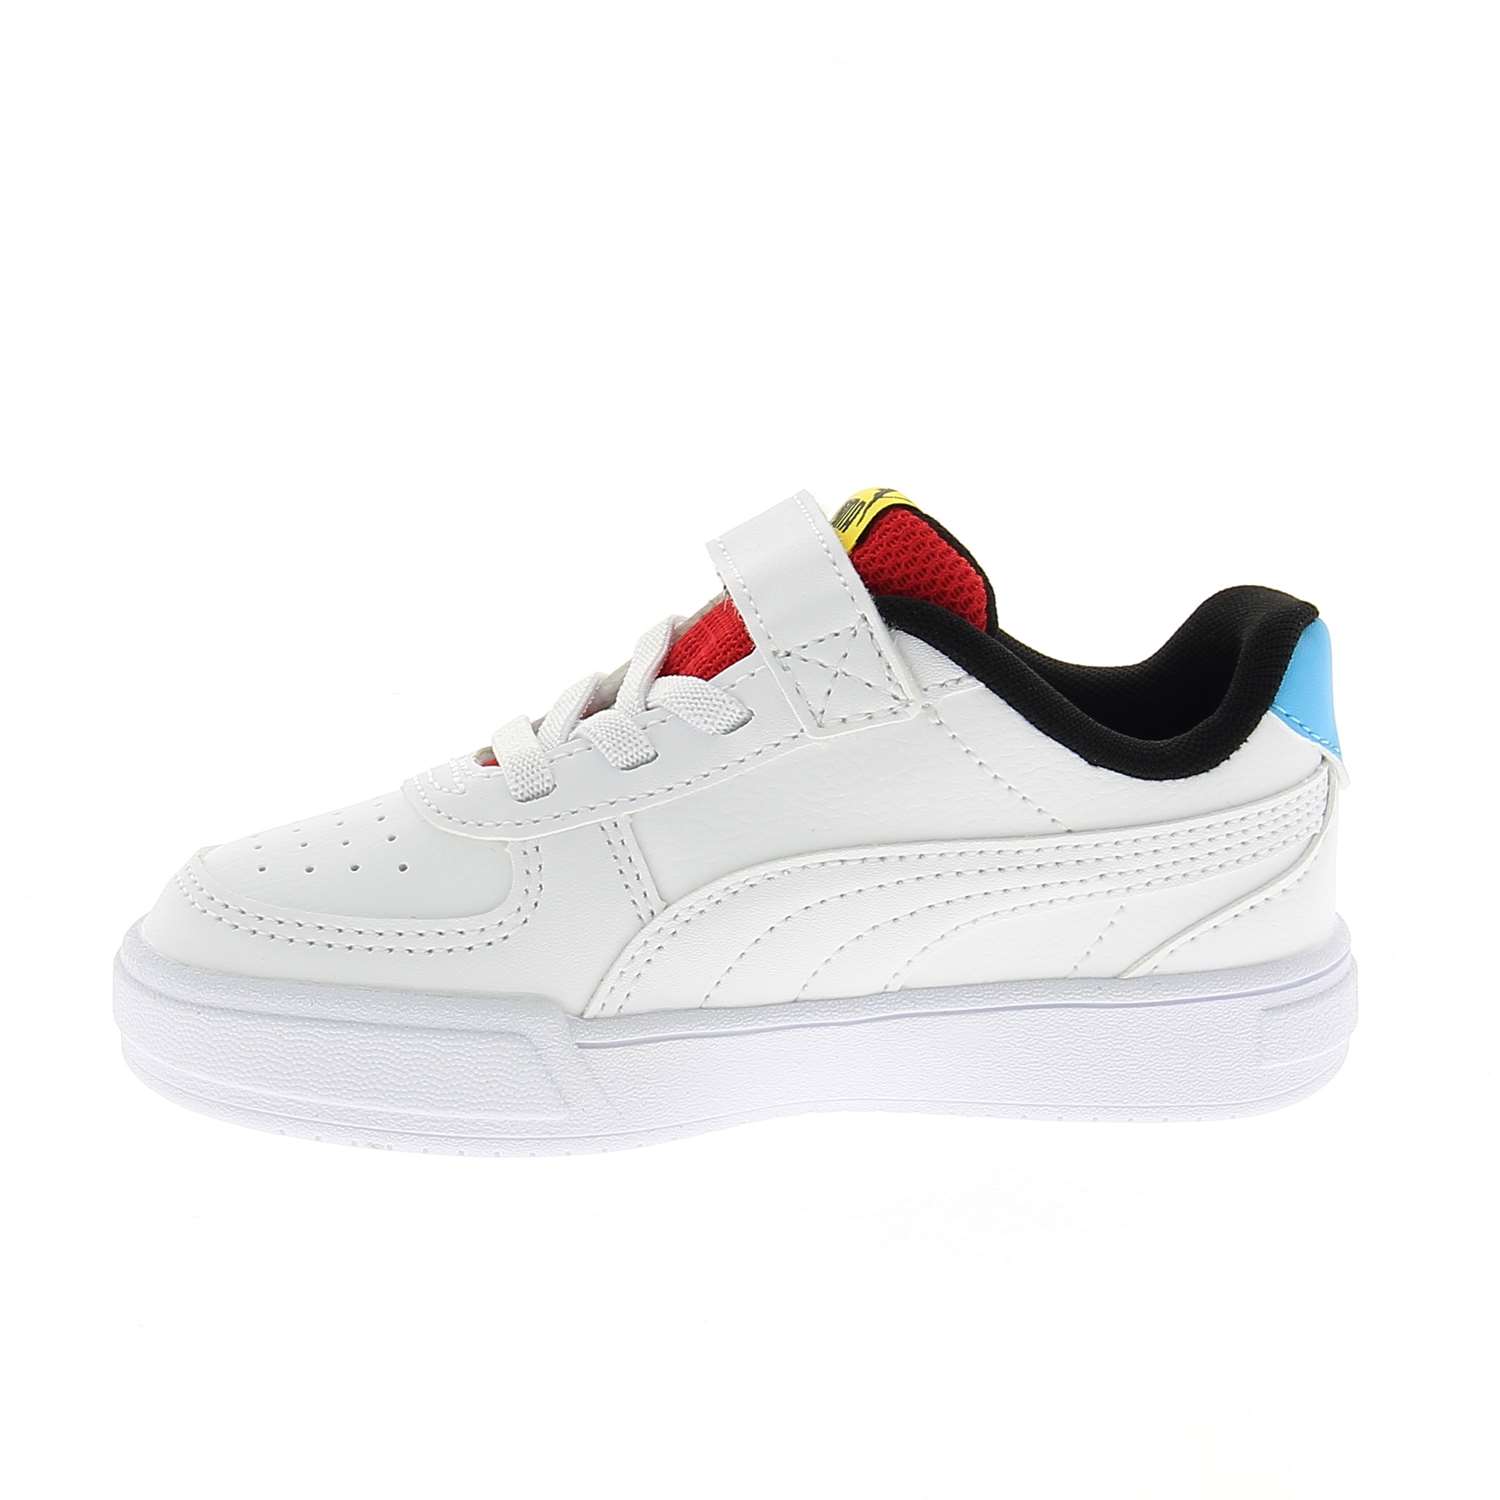 05 - CAVEN BRAND LOVE AC INF - PUMA - Baskets - Synthétique